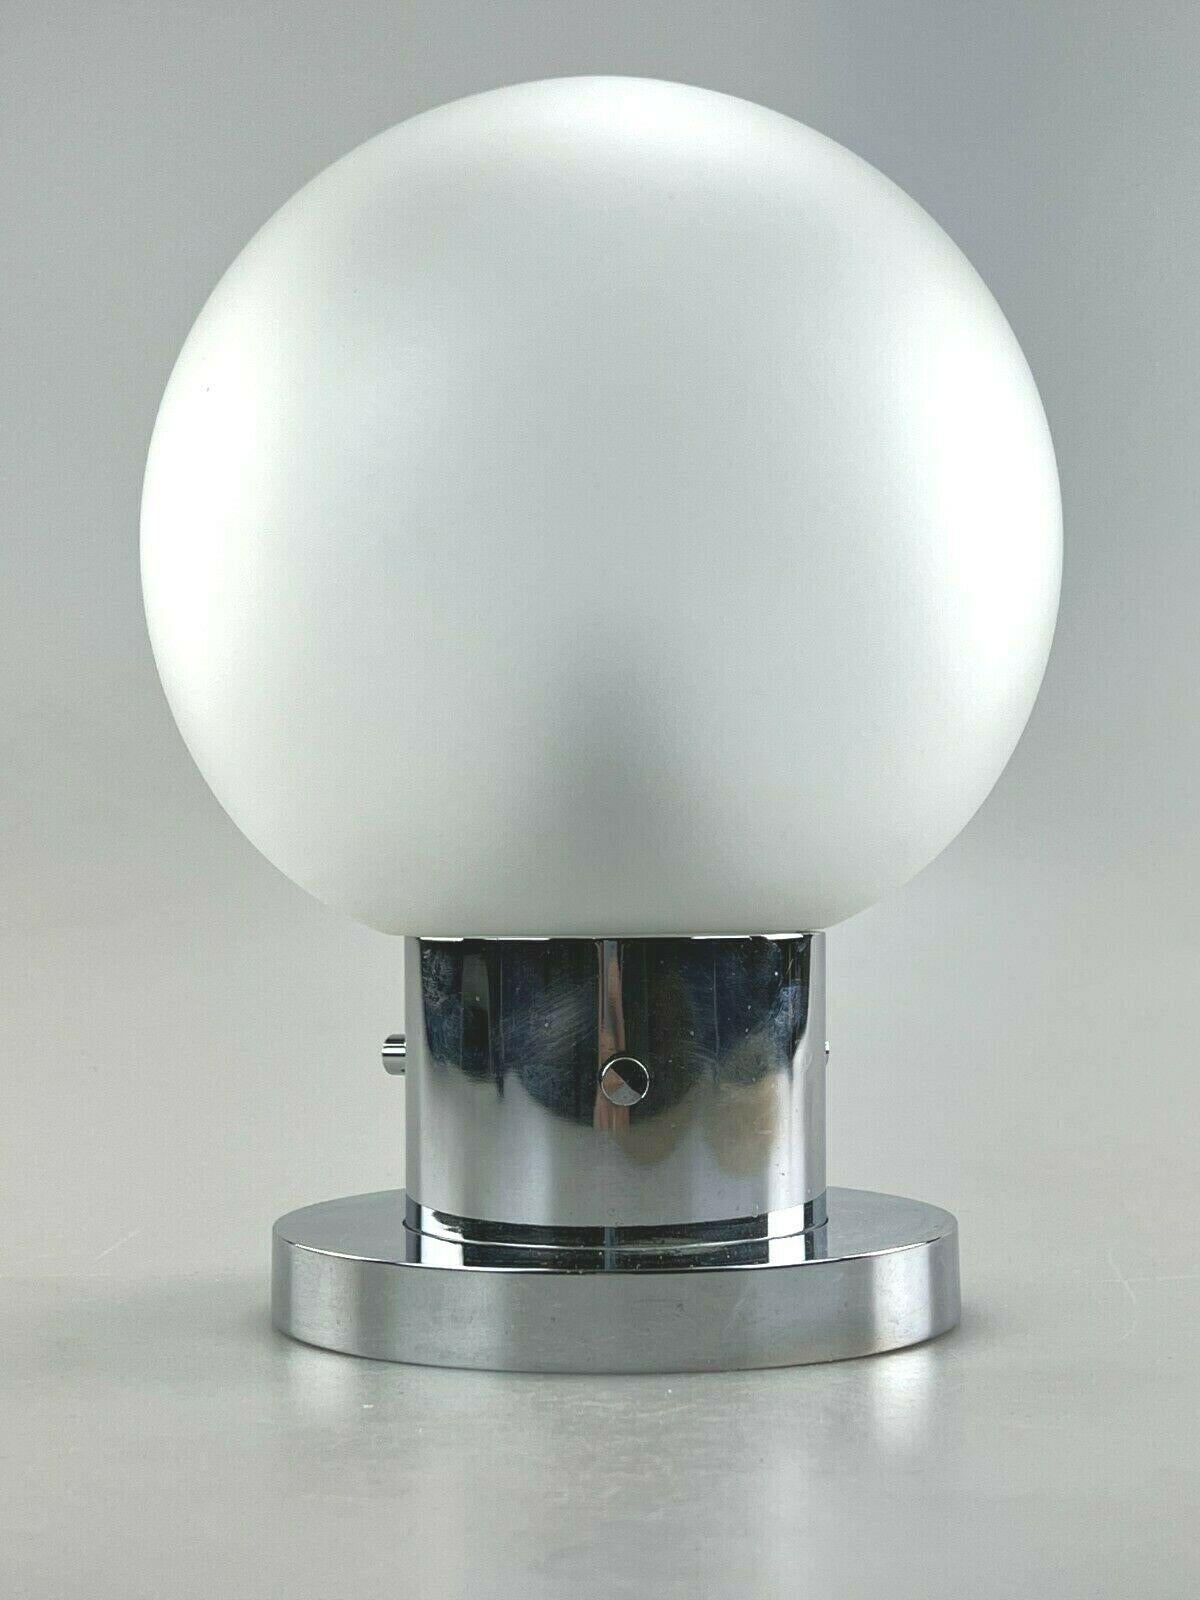 60s 70s Lamp light wall lamp Limburg Plafoniere Space Age Design 60s

Object: wall lamp

Manufacturer: Glashütte Limburg

Condition: good

Age: around 1960-1970

Dimensions:

Diameter = 20cm
Height = 27.5cm

Other notes:

The